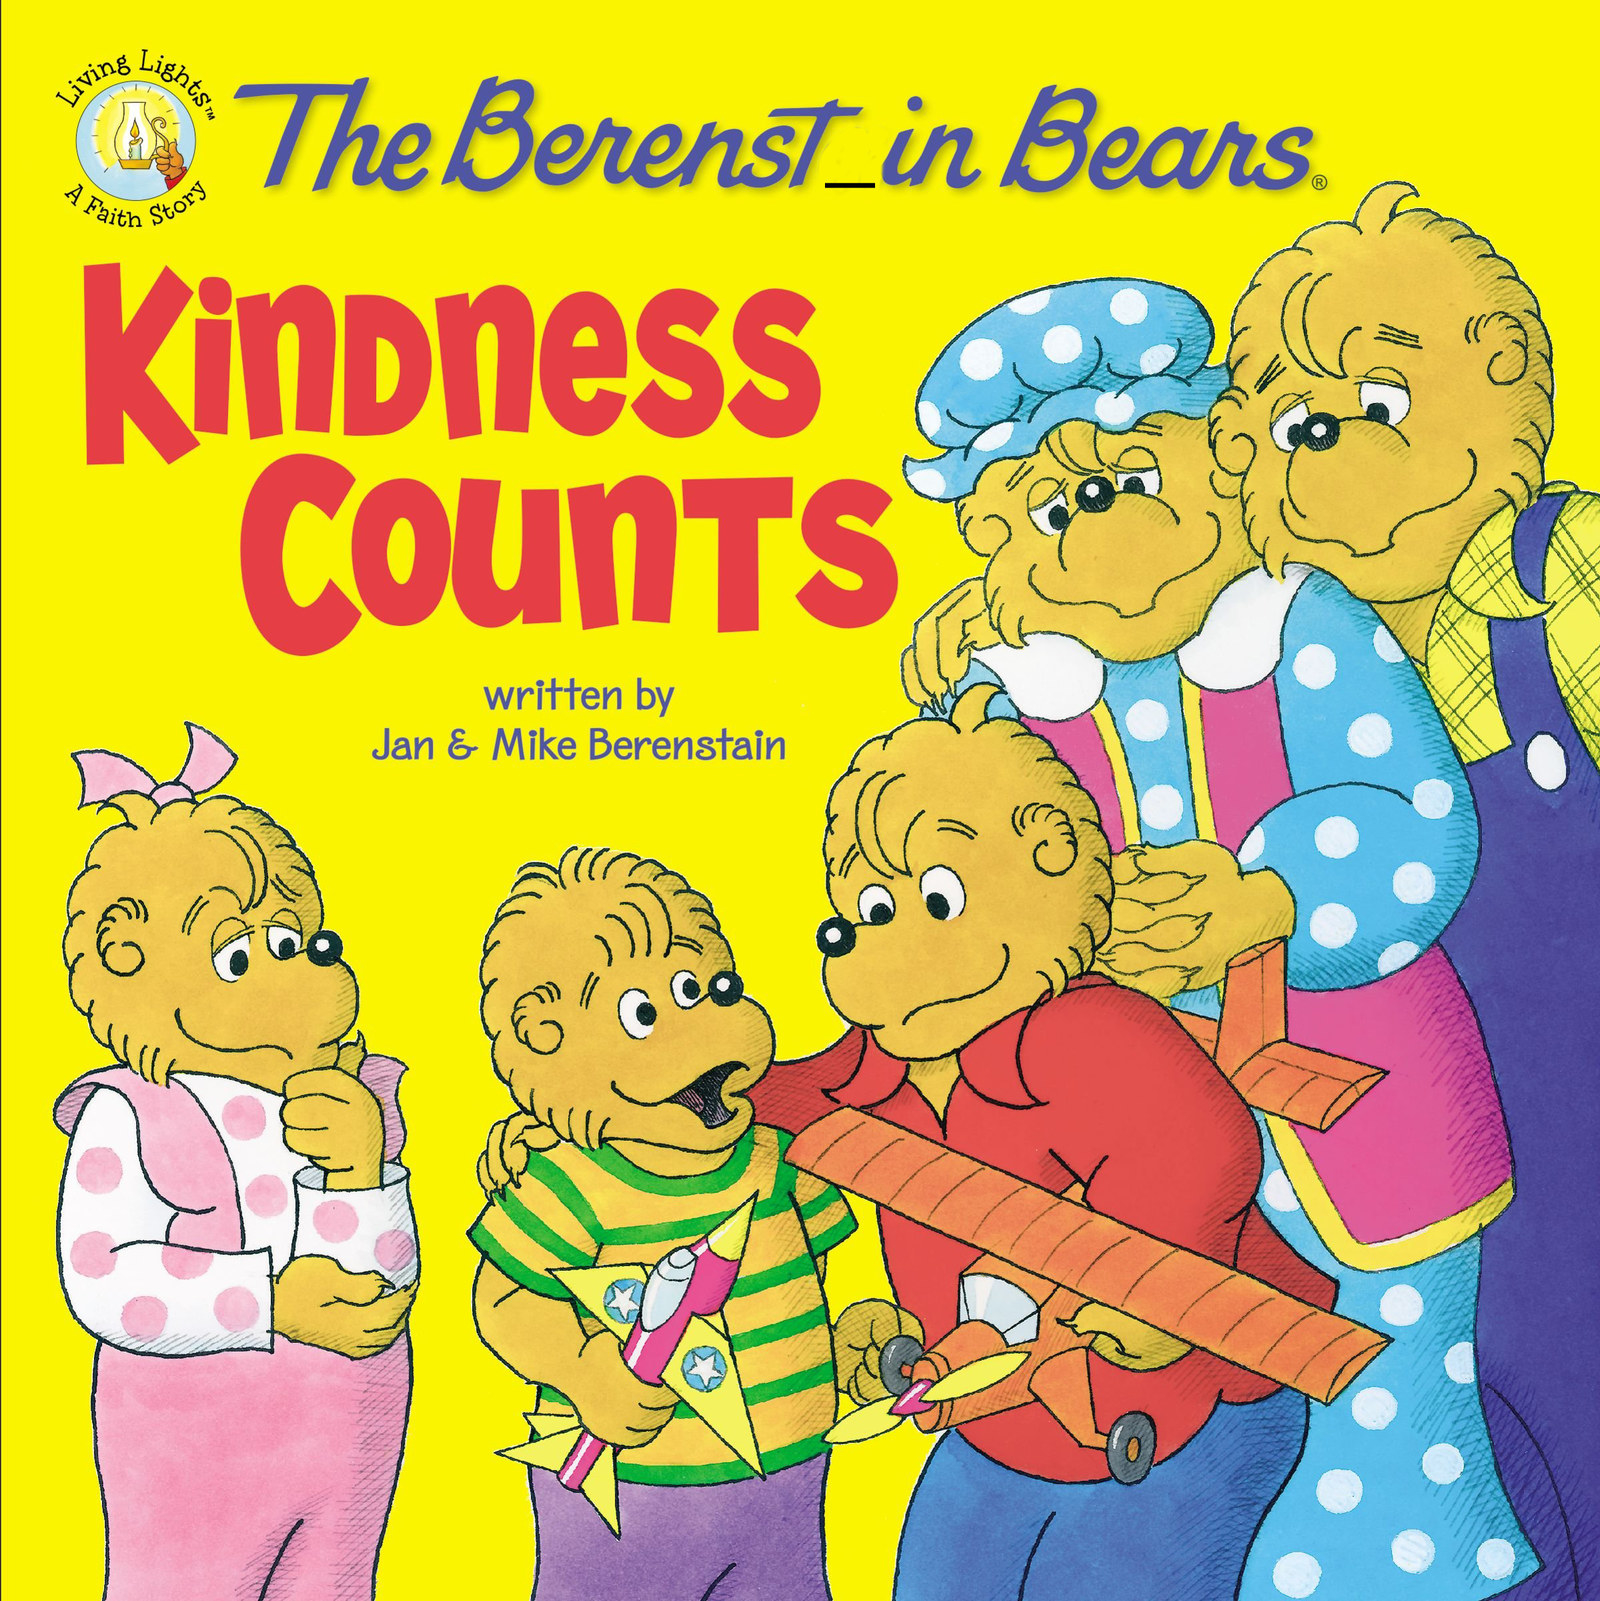 A book with the title, &quot;The Berenst_in Bears&quot;